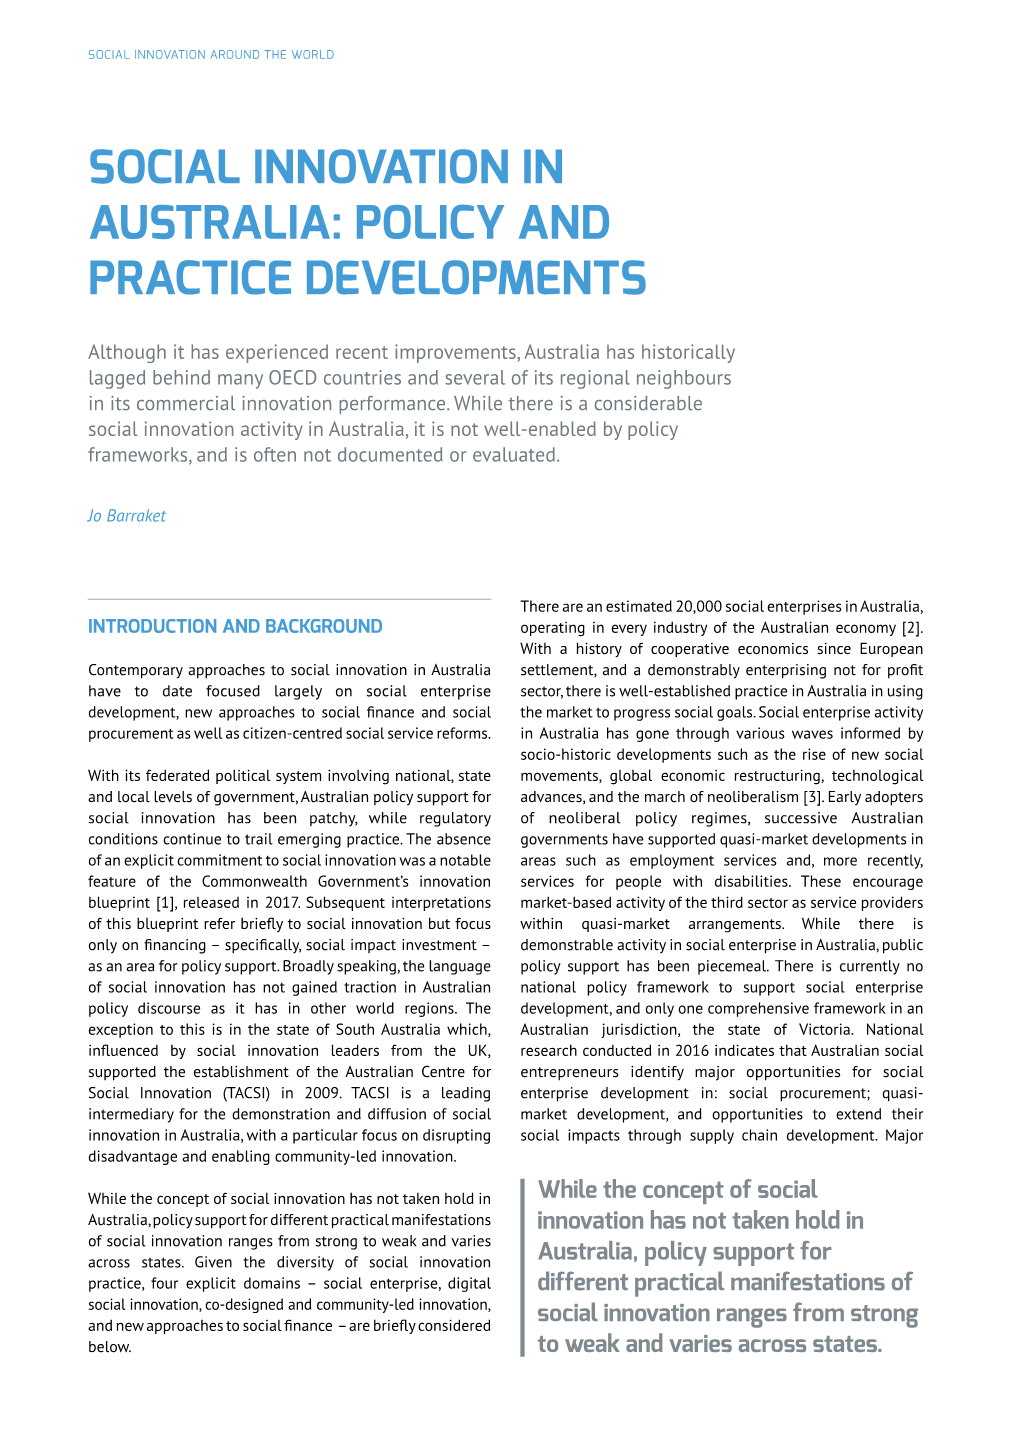 Social Innovation in Australia: Policy and Practice Developments